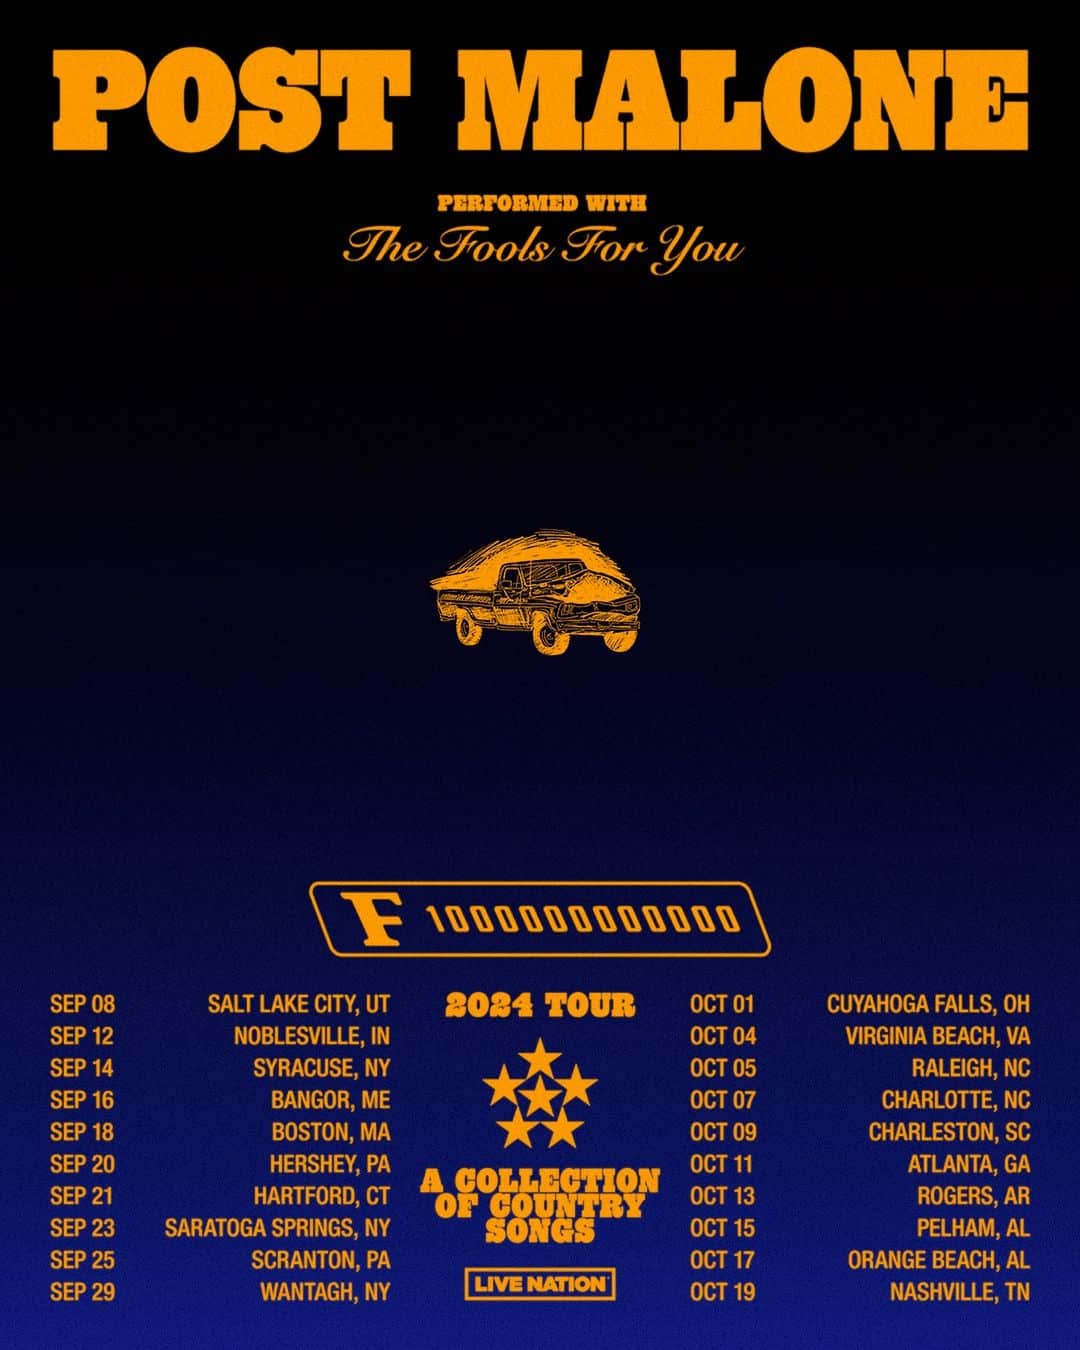 The dates for Post Malone's F-1 Trillion Tour